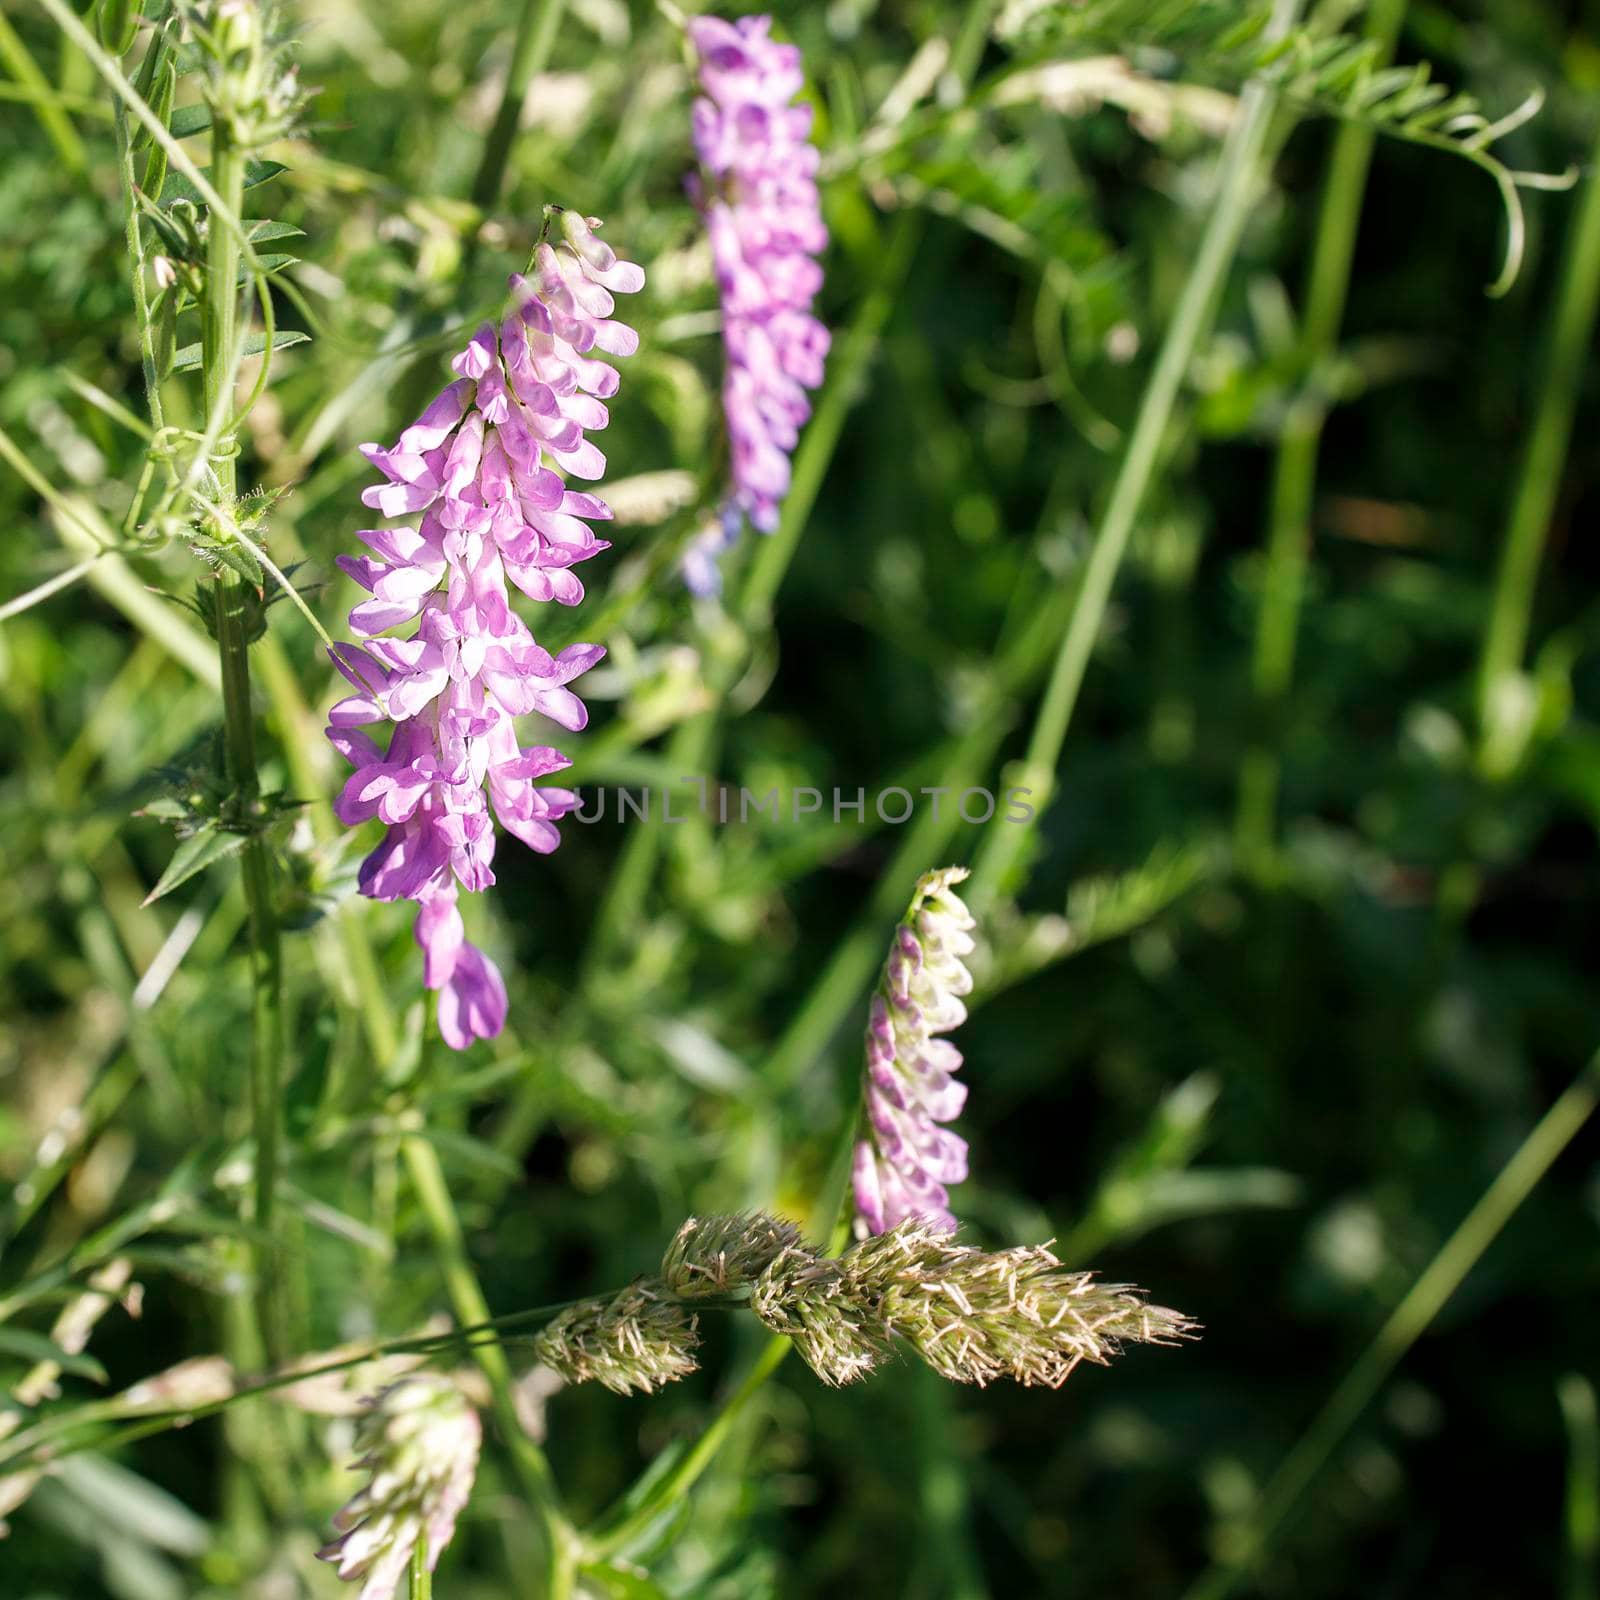 Field of Vicia cracca, is a species of vetch native to Europe and Asia. Square frame by elenarostunova